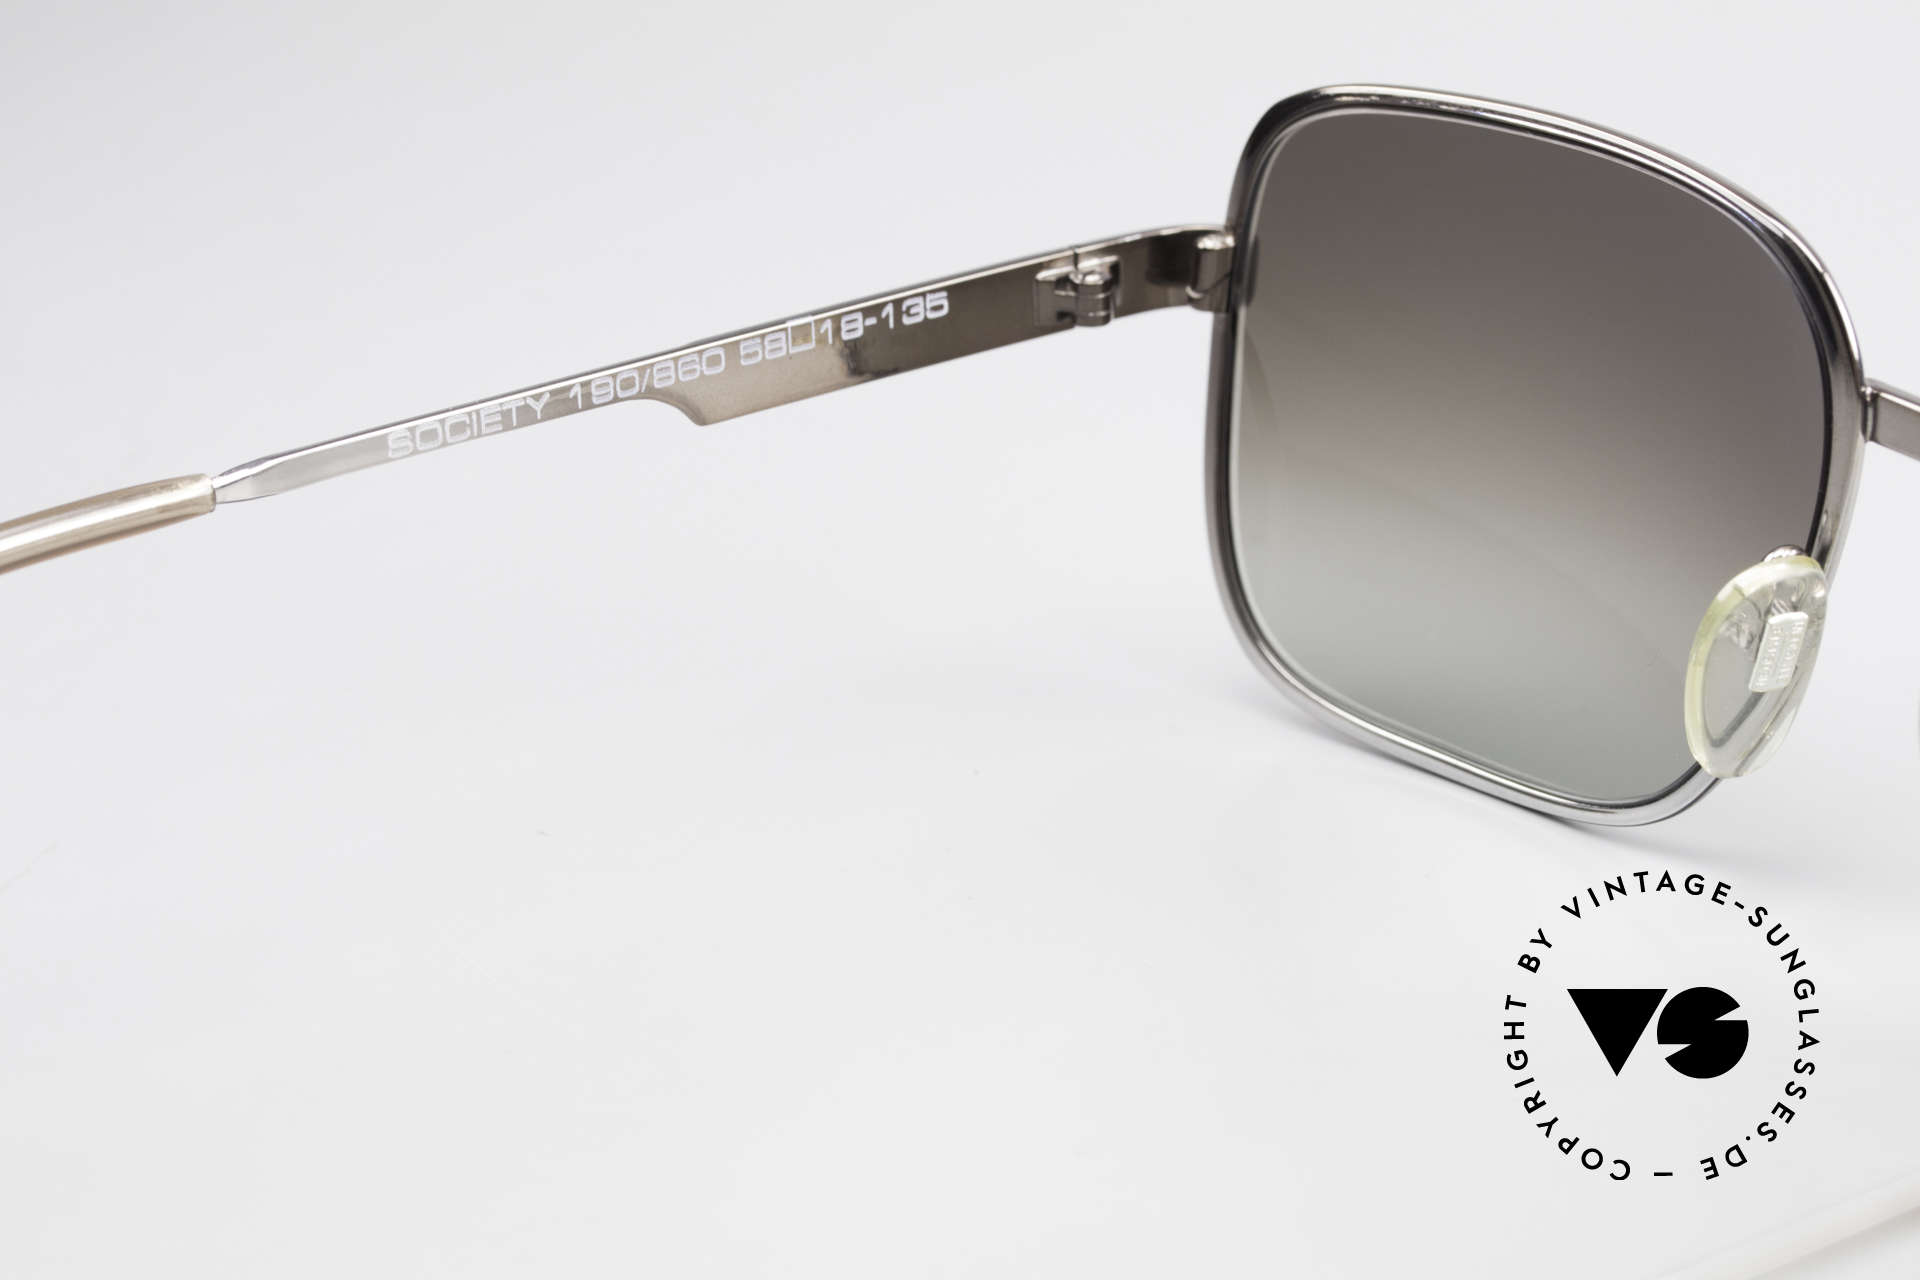 Neostyle Society 190 80's Haute Couture Sunglasses, very interesting frame finish looks gunmetal/gray, Made for Men